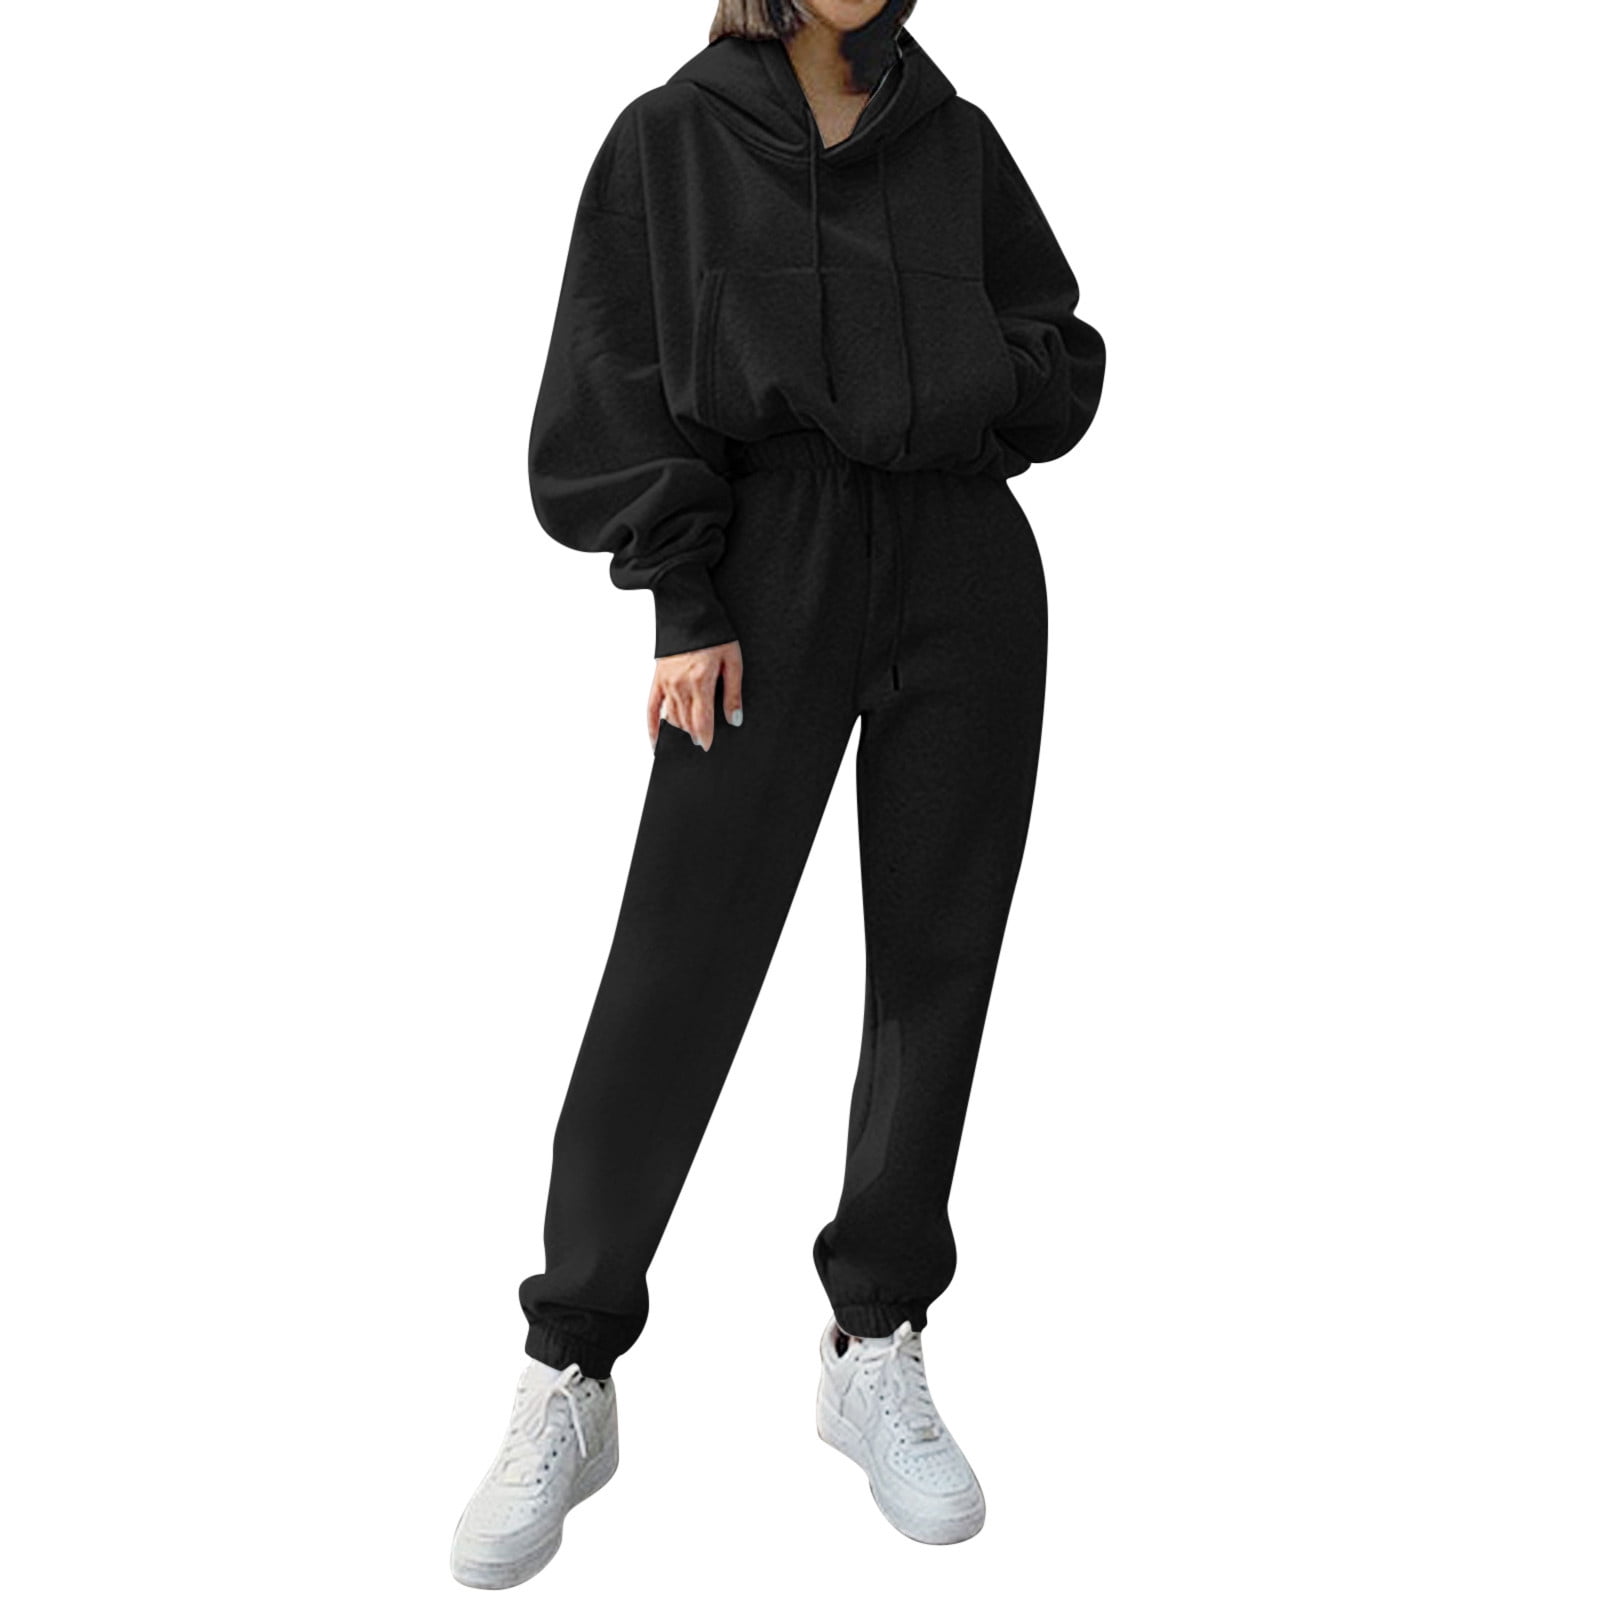 WANYNG jumpsuits for women Hoodies Suit Winter Spring Solid Casual